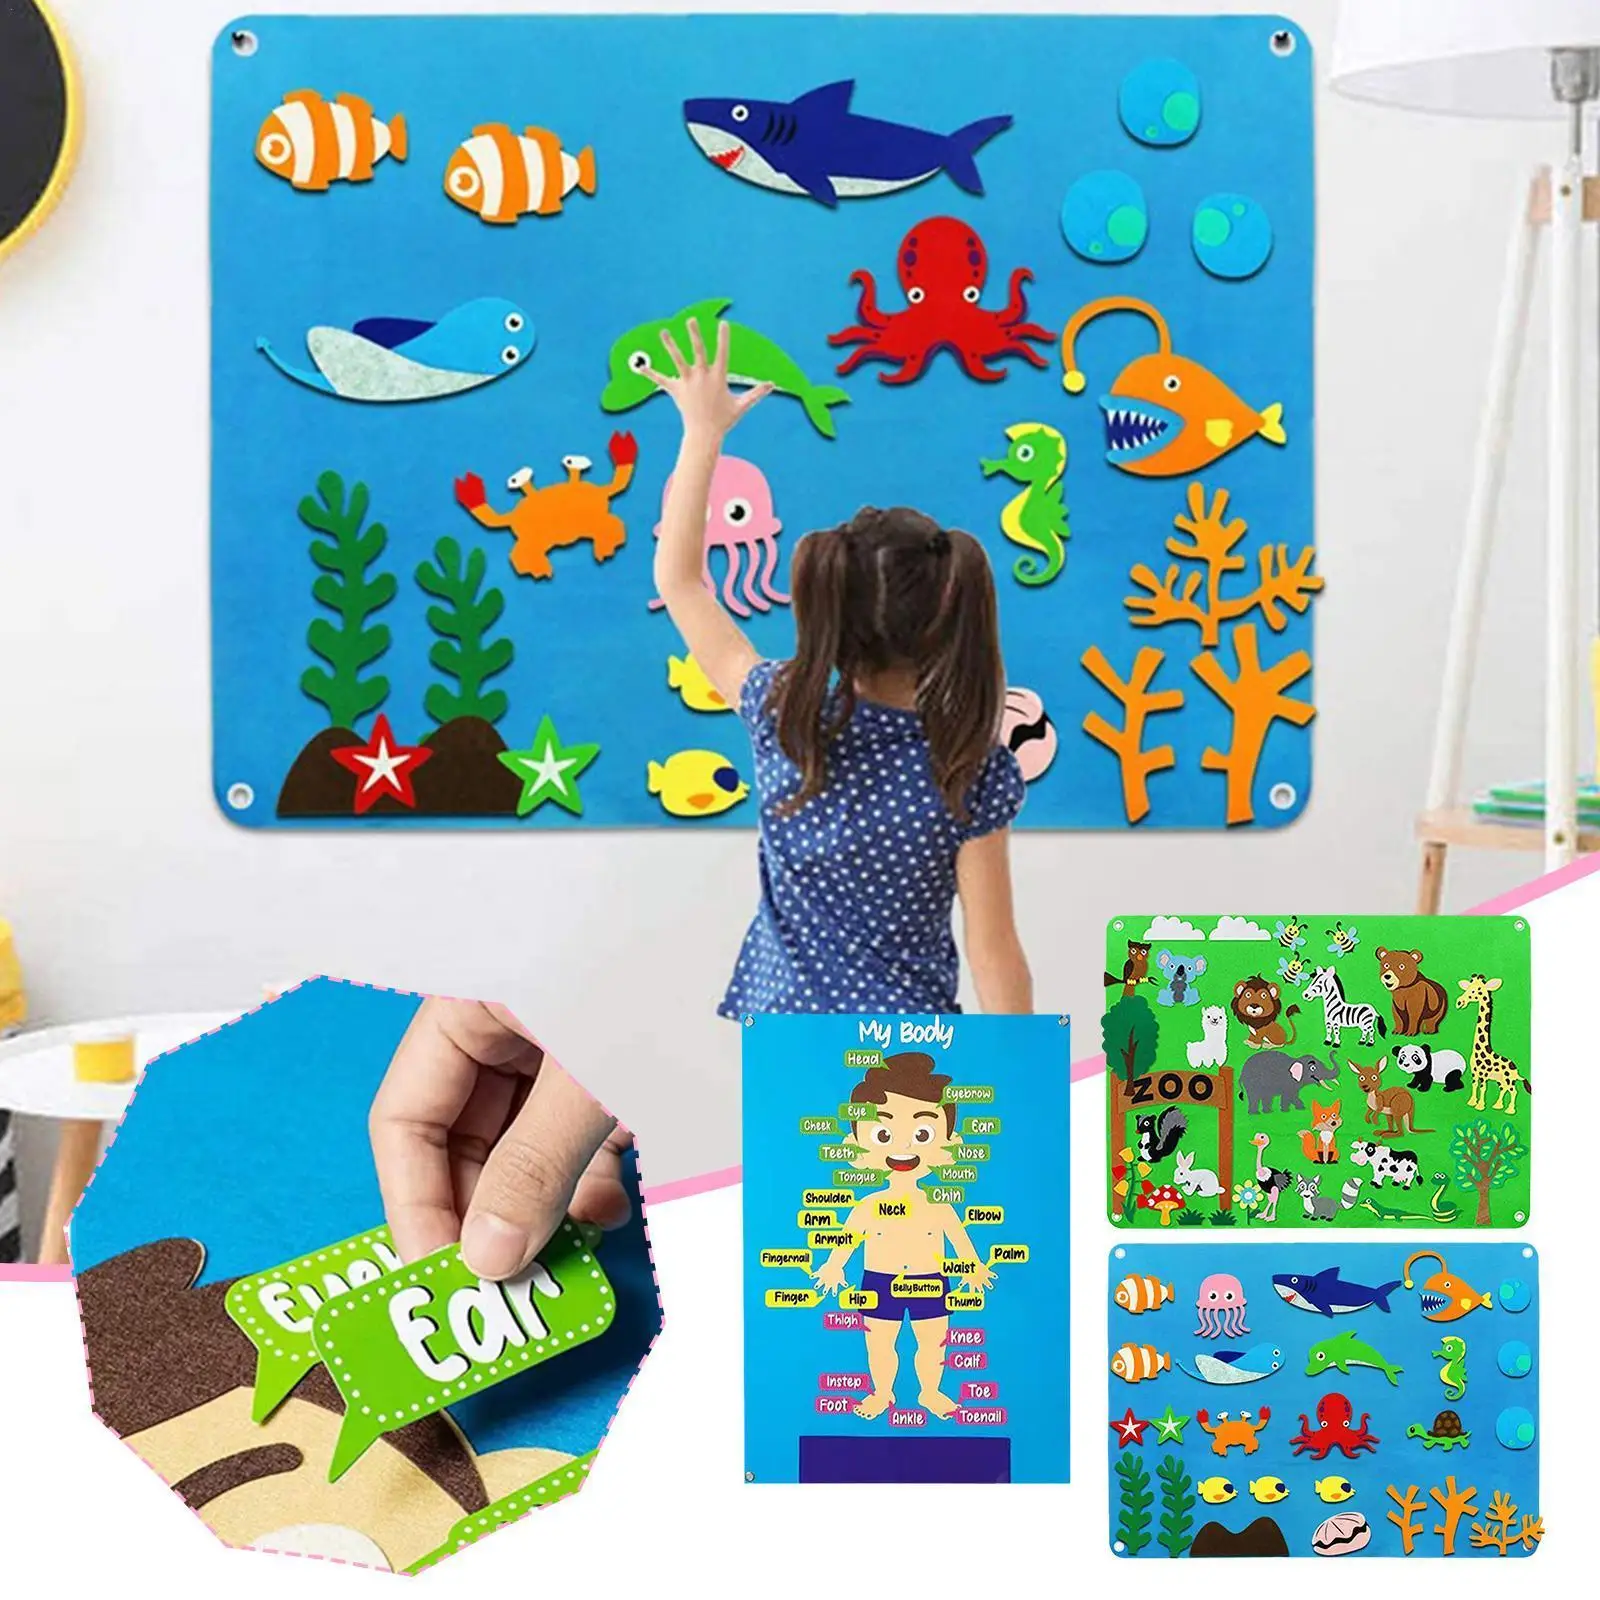 Diy Felt Board Toys Toddler Interactive Storytelling Animals Cartoon Wall Toys Baby Learning Decoration Pattern Early Monte S3y1